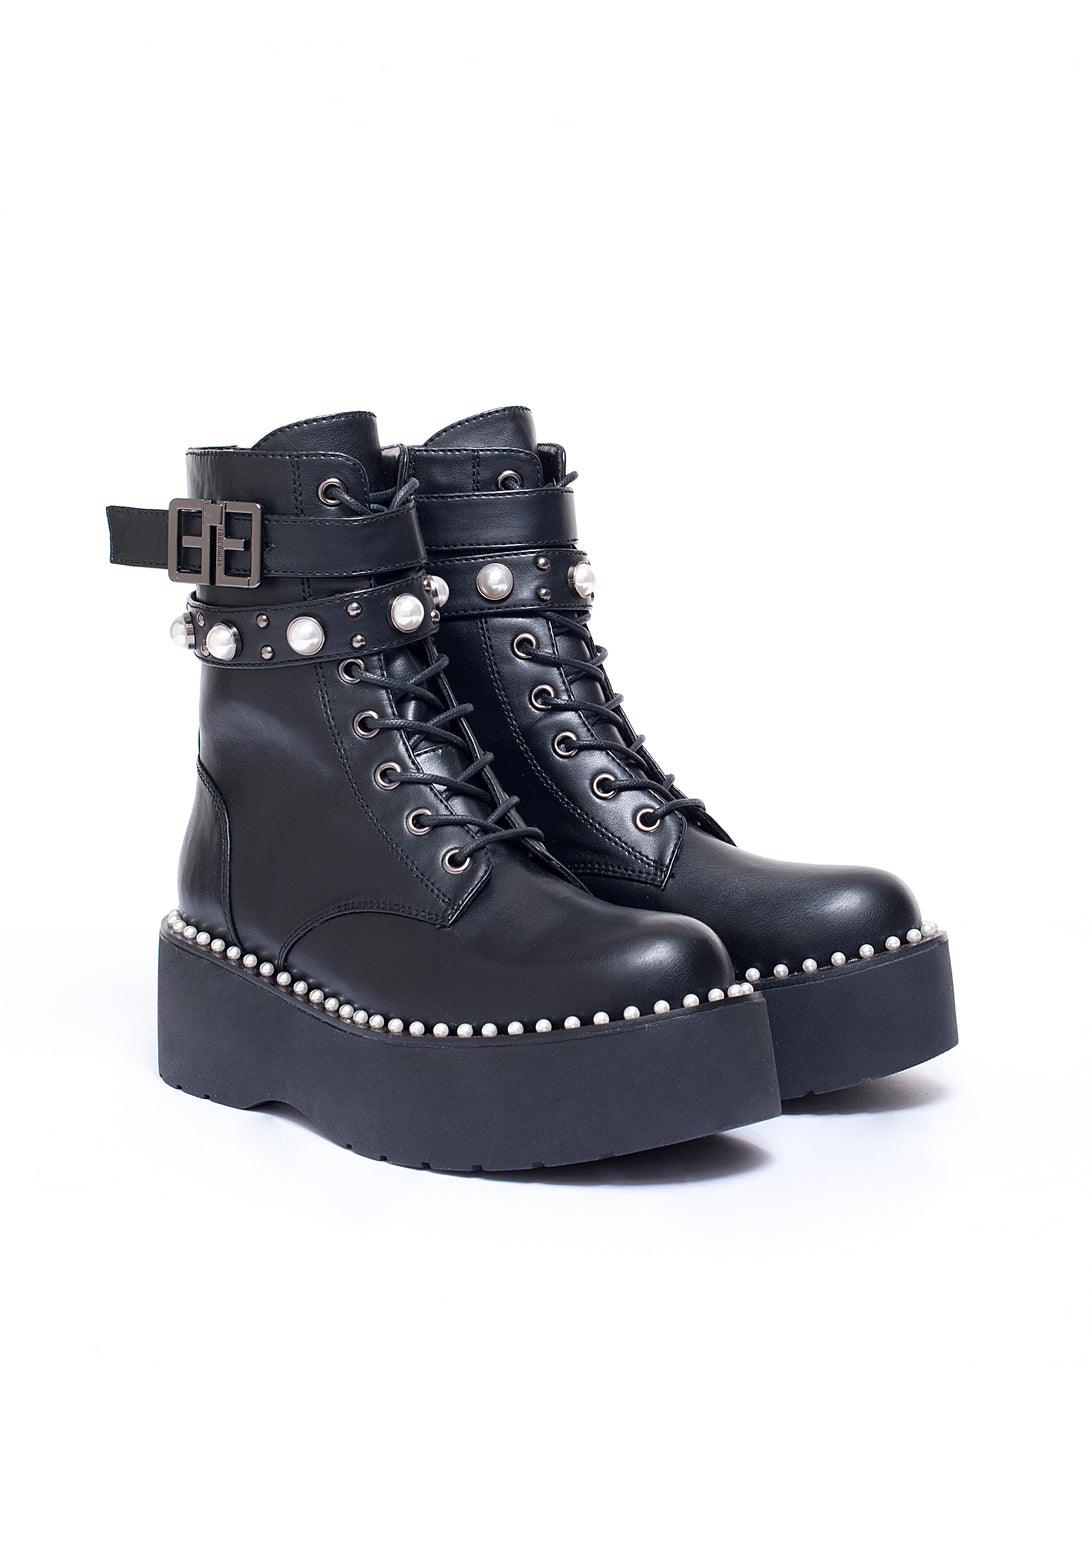 Combat boots made in eco leather with pearls